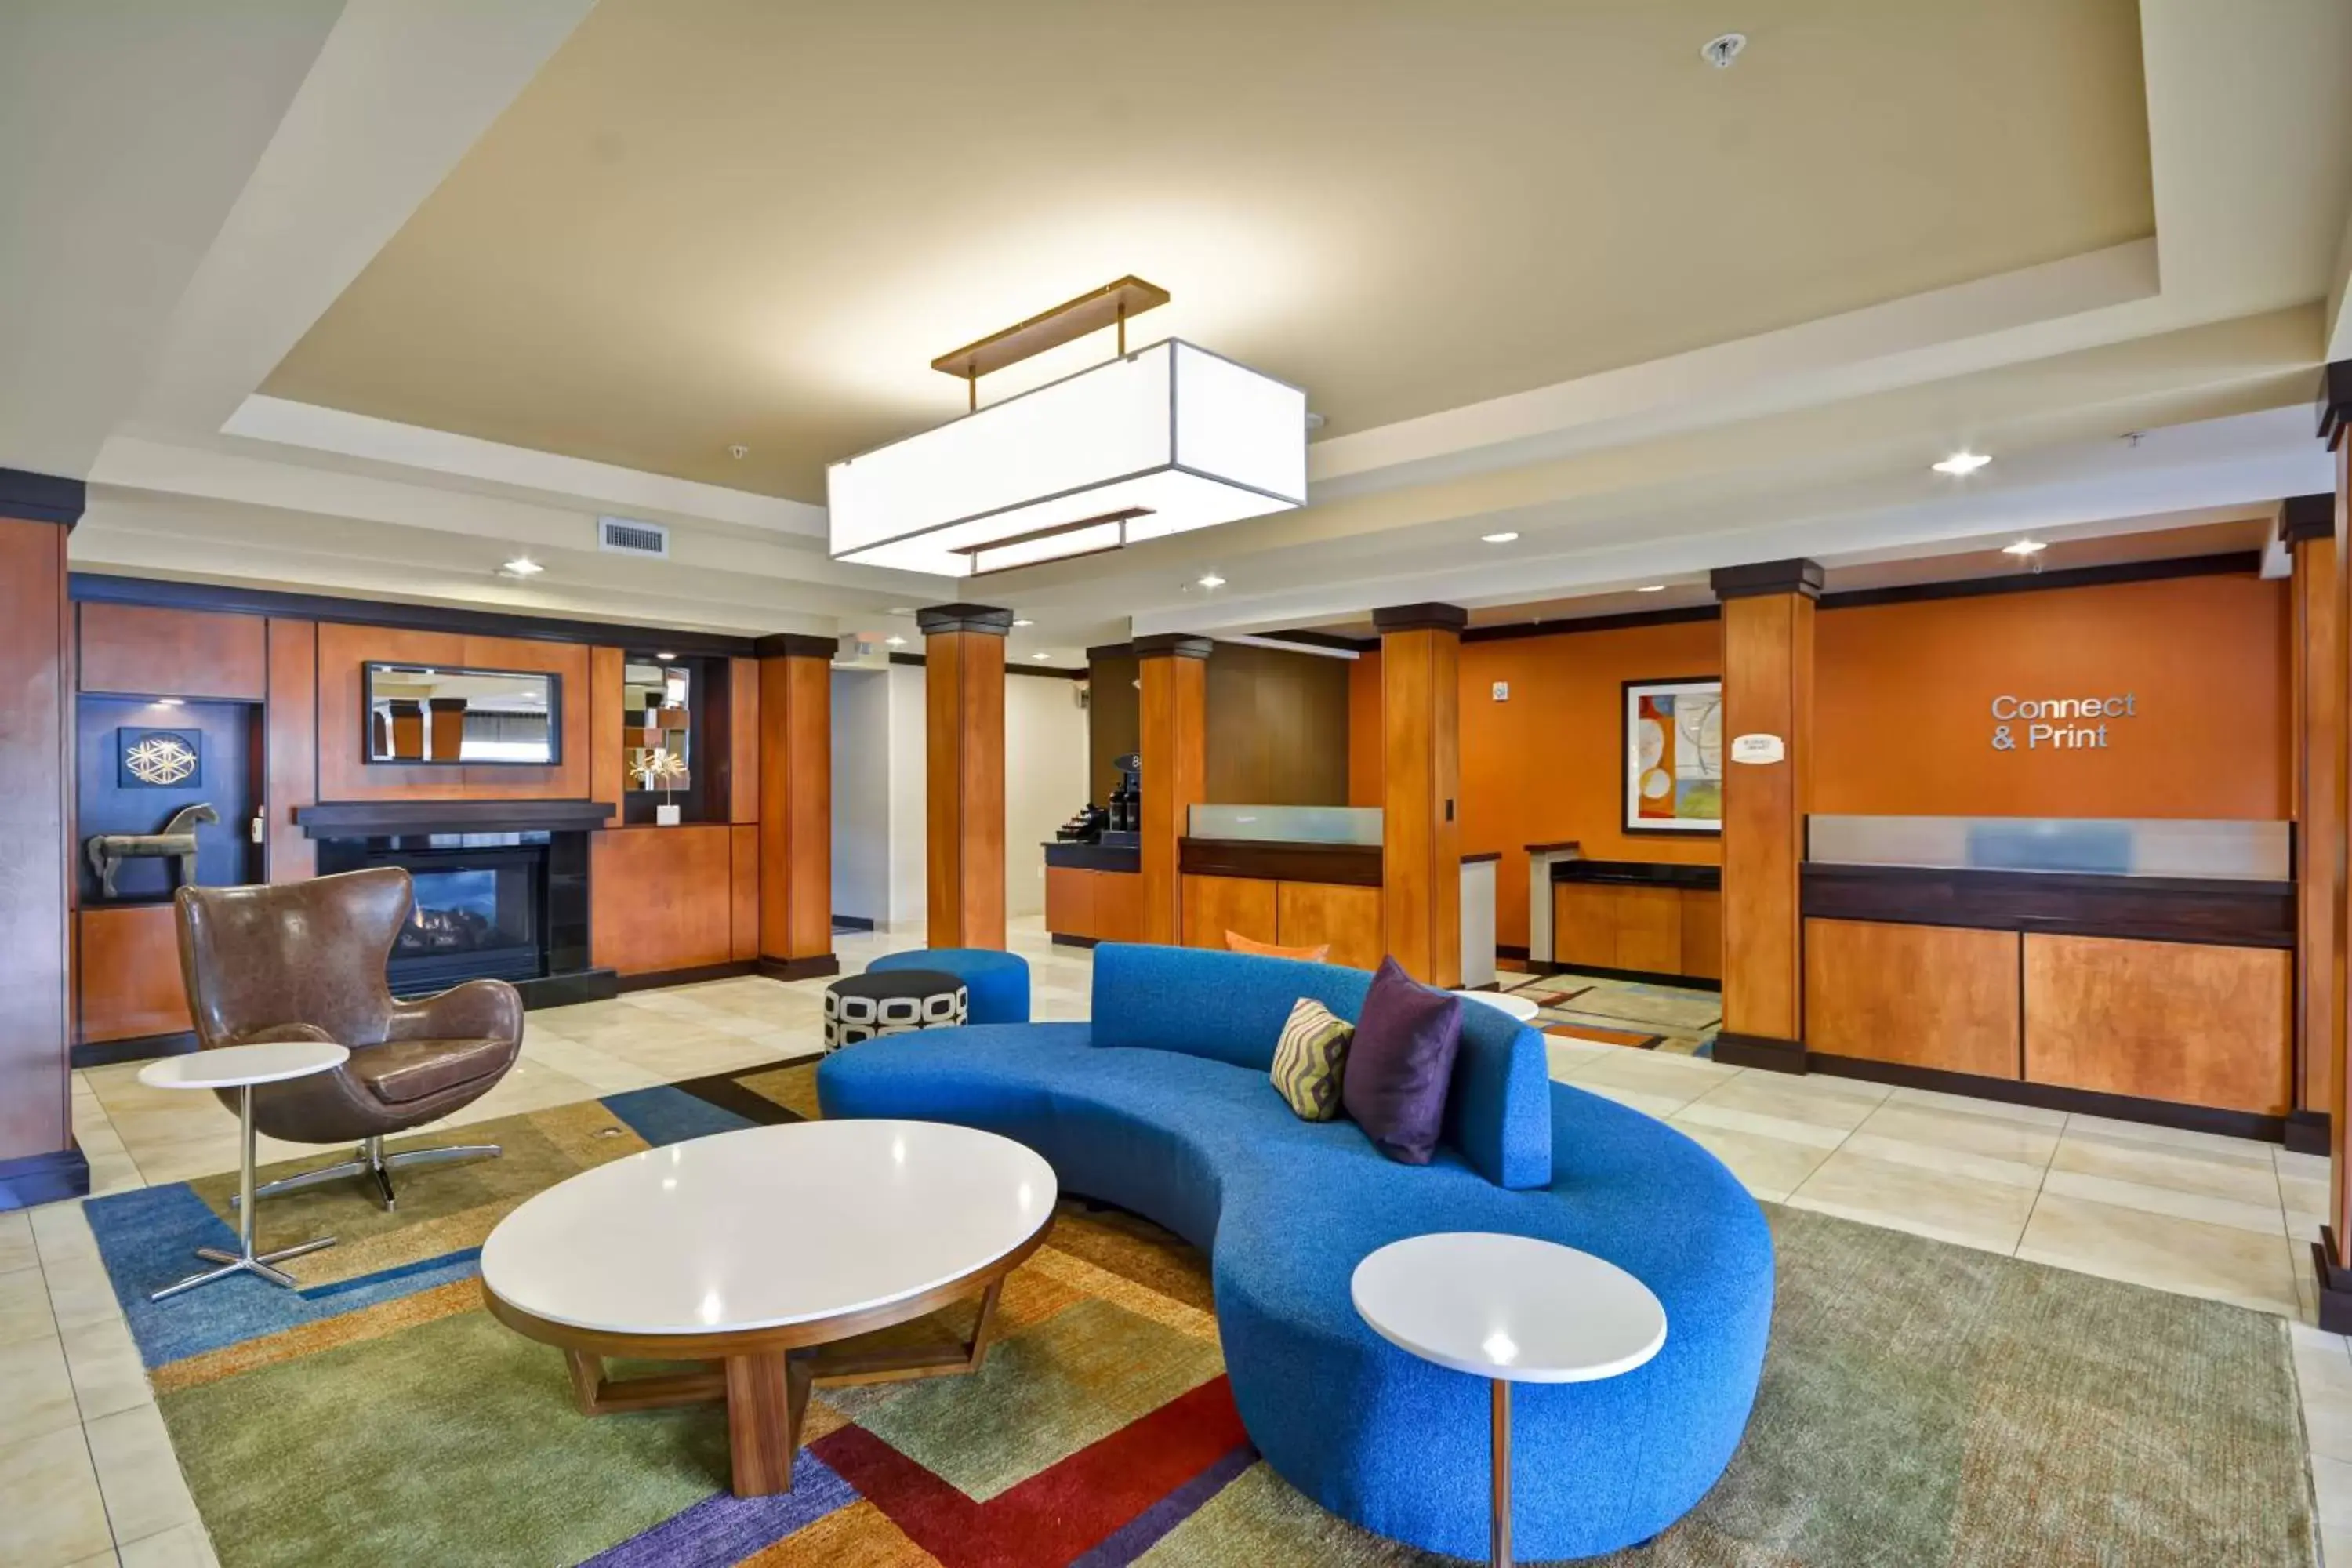 Lobby or reception in Fairfield Inn & Suites Tampa Fairgrounds/Casino